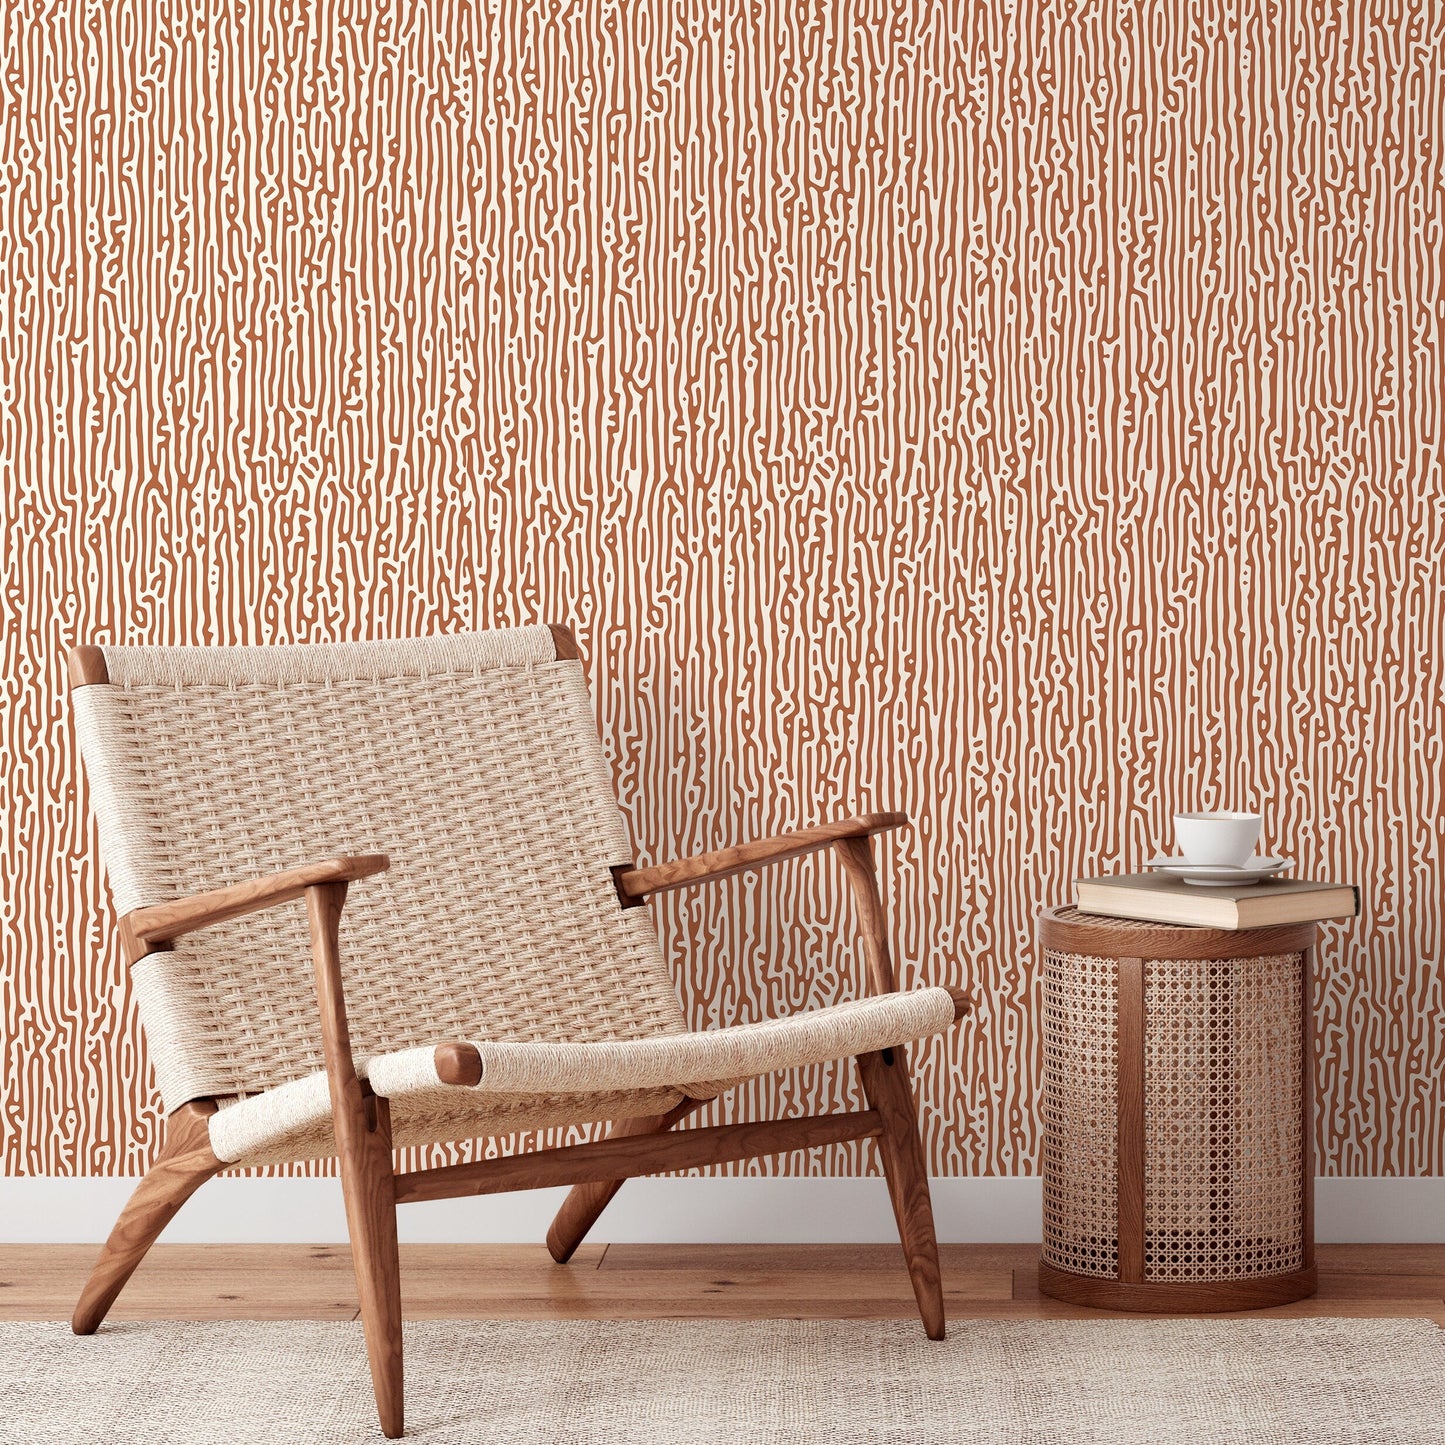 Terracotta Abstract Wallpaper Contemporary Art Wallpaper Peel and Stick and Traditional Wallpaper - D854